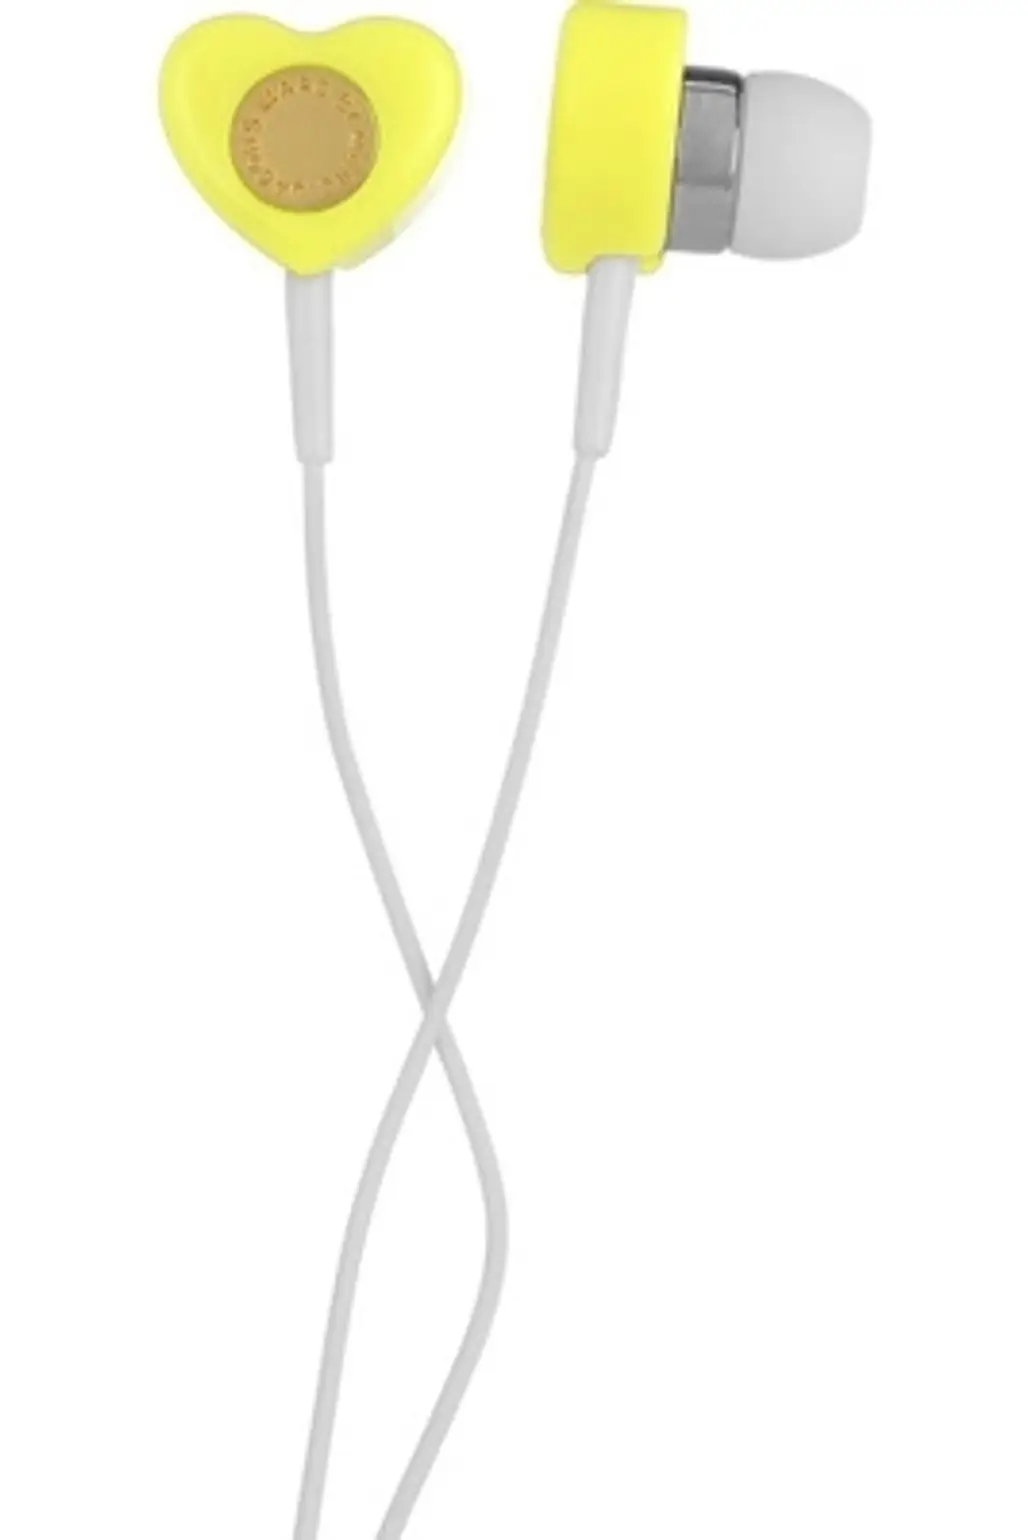 Marc by Marc Jacobs Heart Shaped Acetate Earbuds